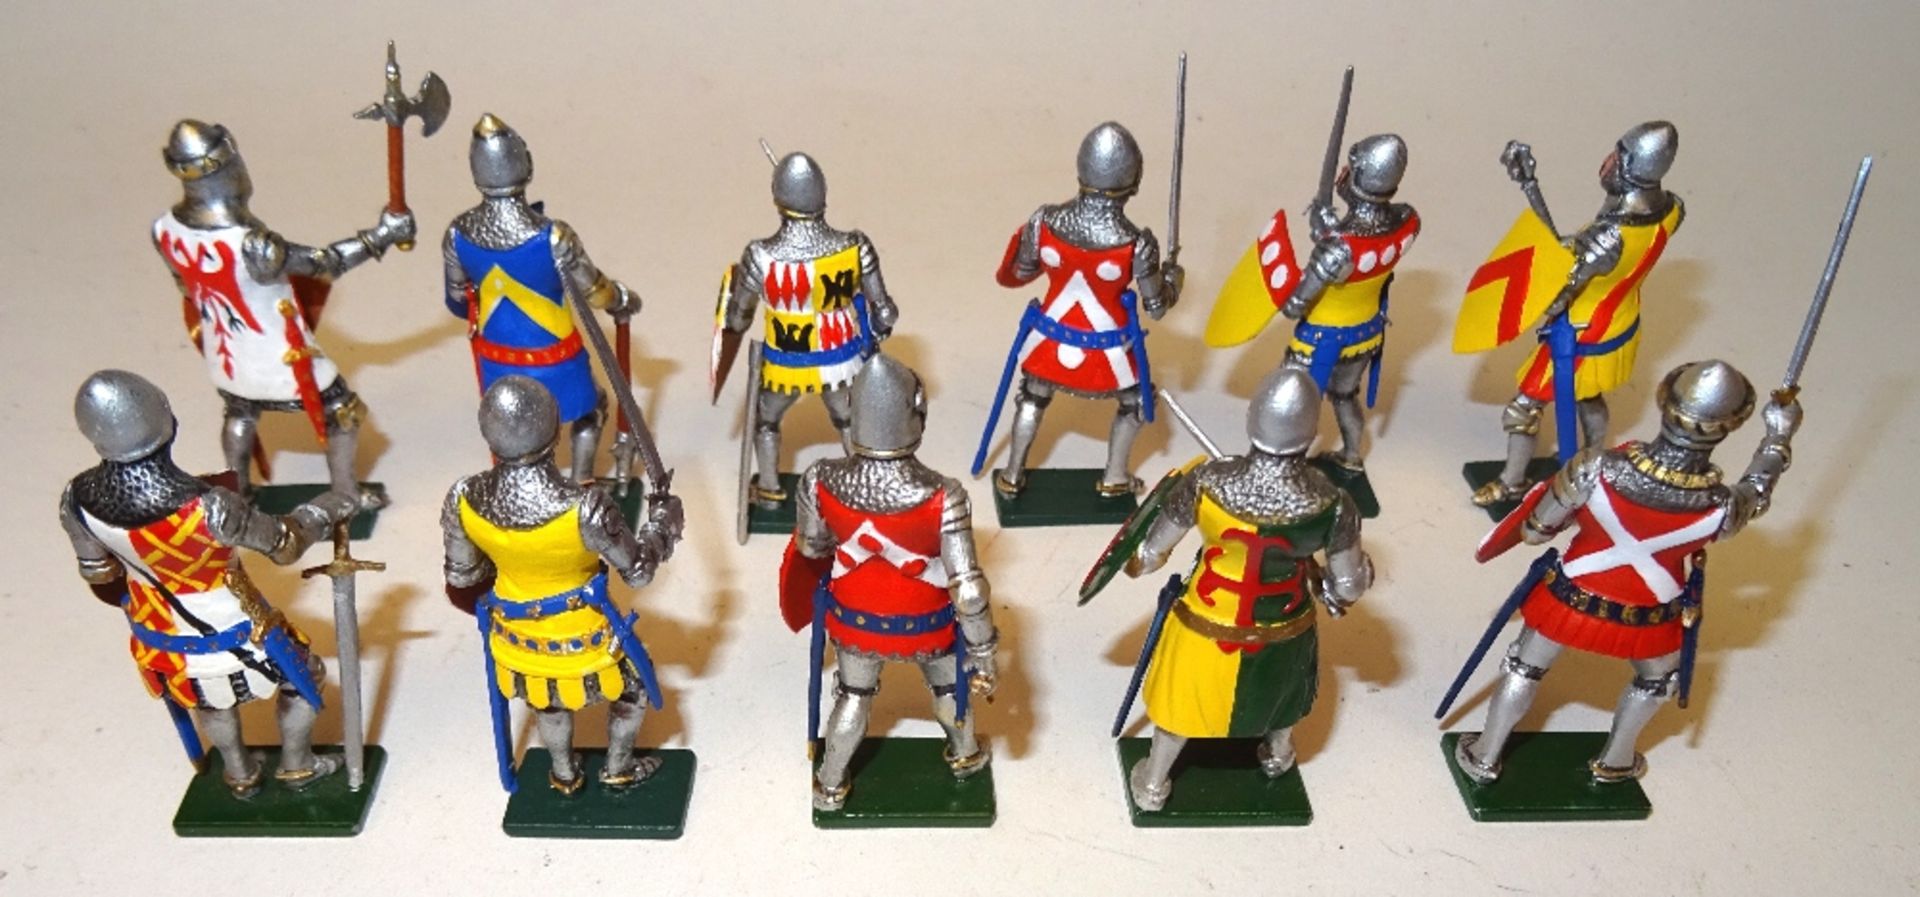 Tradition 52mm scale Knights of the Hundred Years War - Image 3 of 3